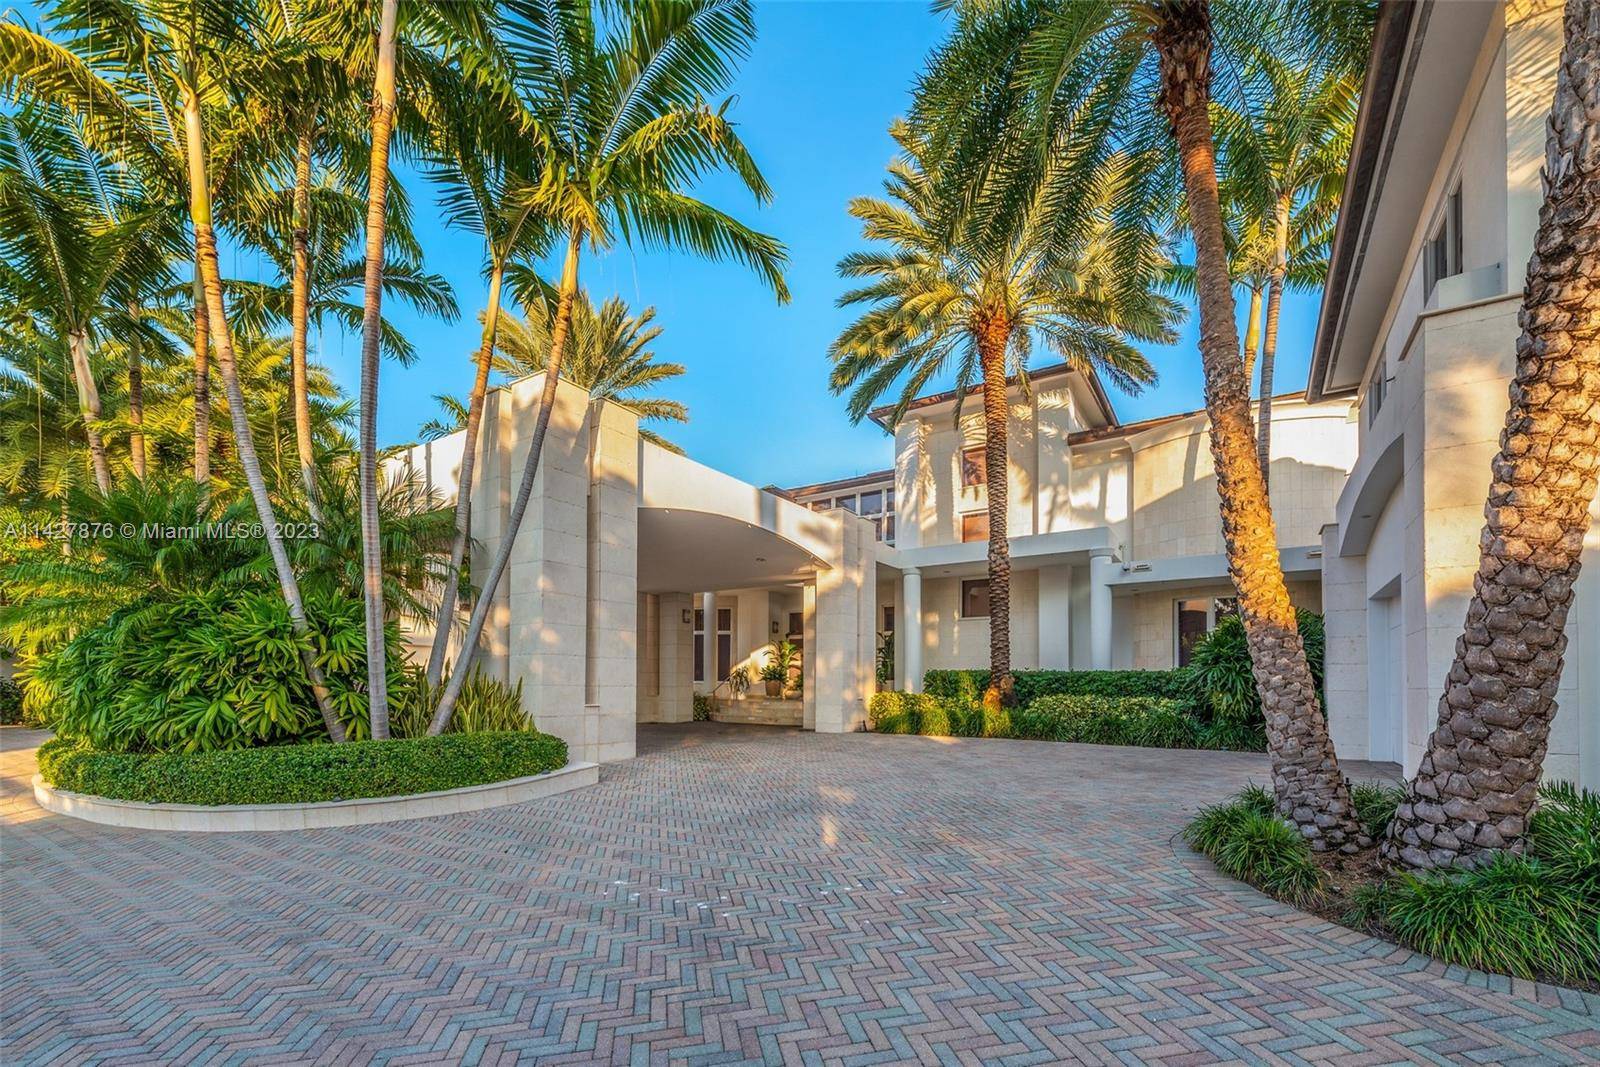 Welcome to this stunning oceanfront property with 150 ft of prime coastal real estate.